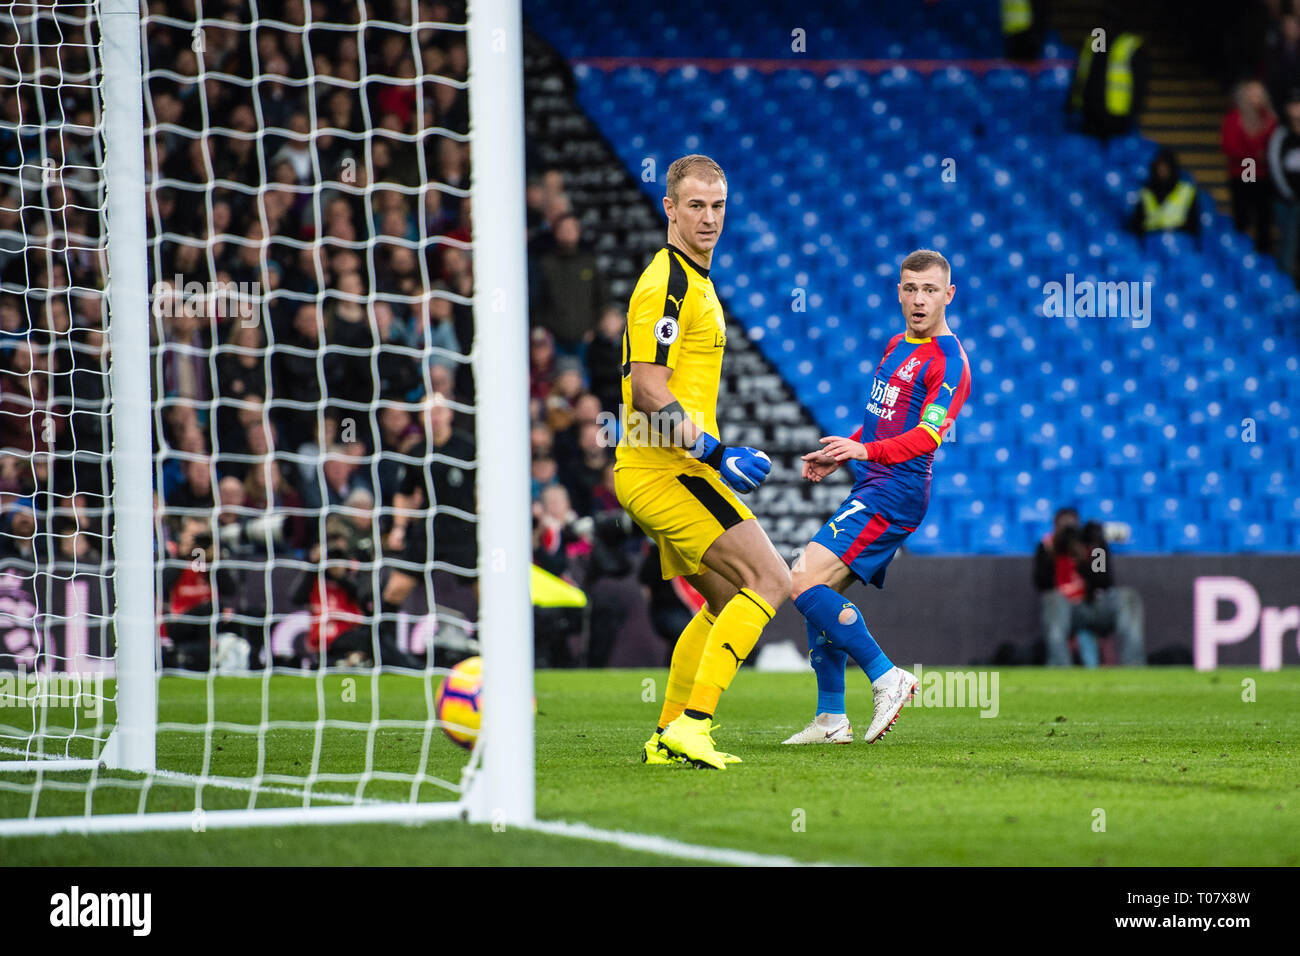 LONDON, ENGLAND - DECEMBER 01: Joe Hart of Burnley FC concede goal after James McArthur (not on picture) shot during the Premier League match between Crystal Palace and Burnley FC at Selhurst Park on December 1, 2018 in London, United Kingdom. (Photo by Sebastian Frej/MB Media) Stock Photo